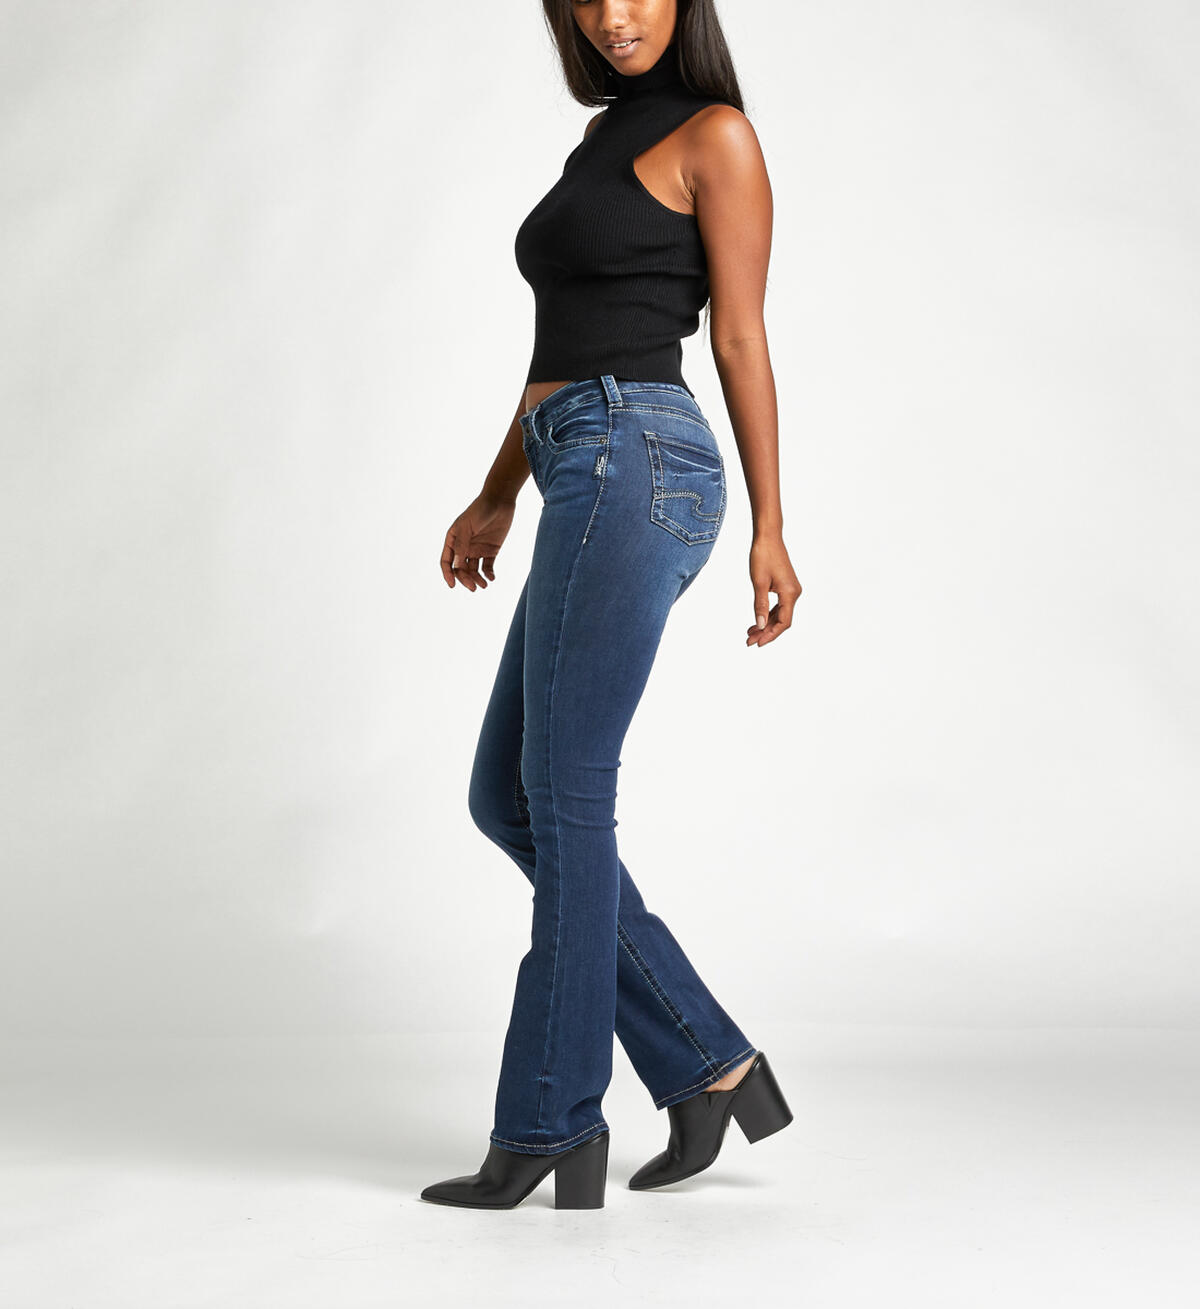 Aiko Mid Rise Slim Bootcut Jeans Final Sale, , hi-res image number 2